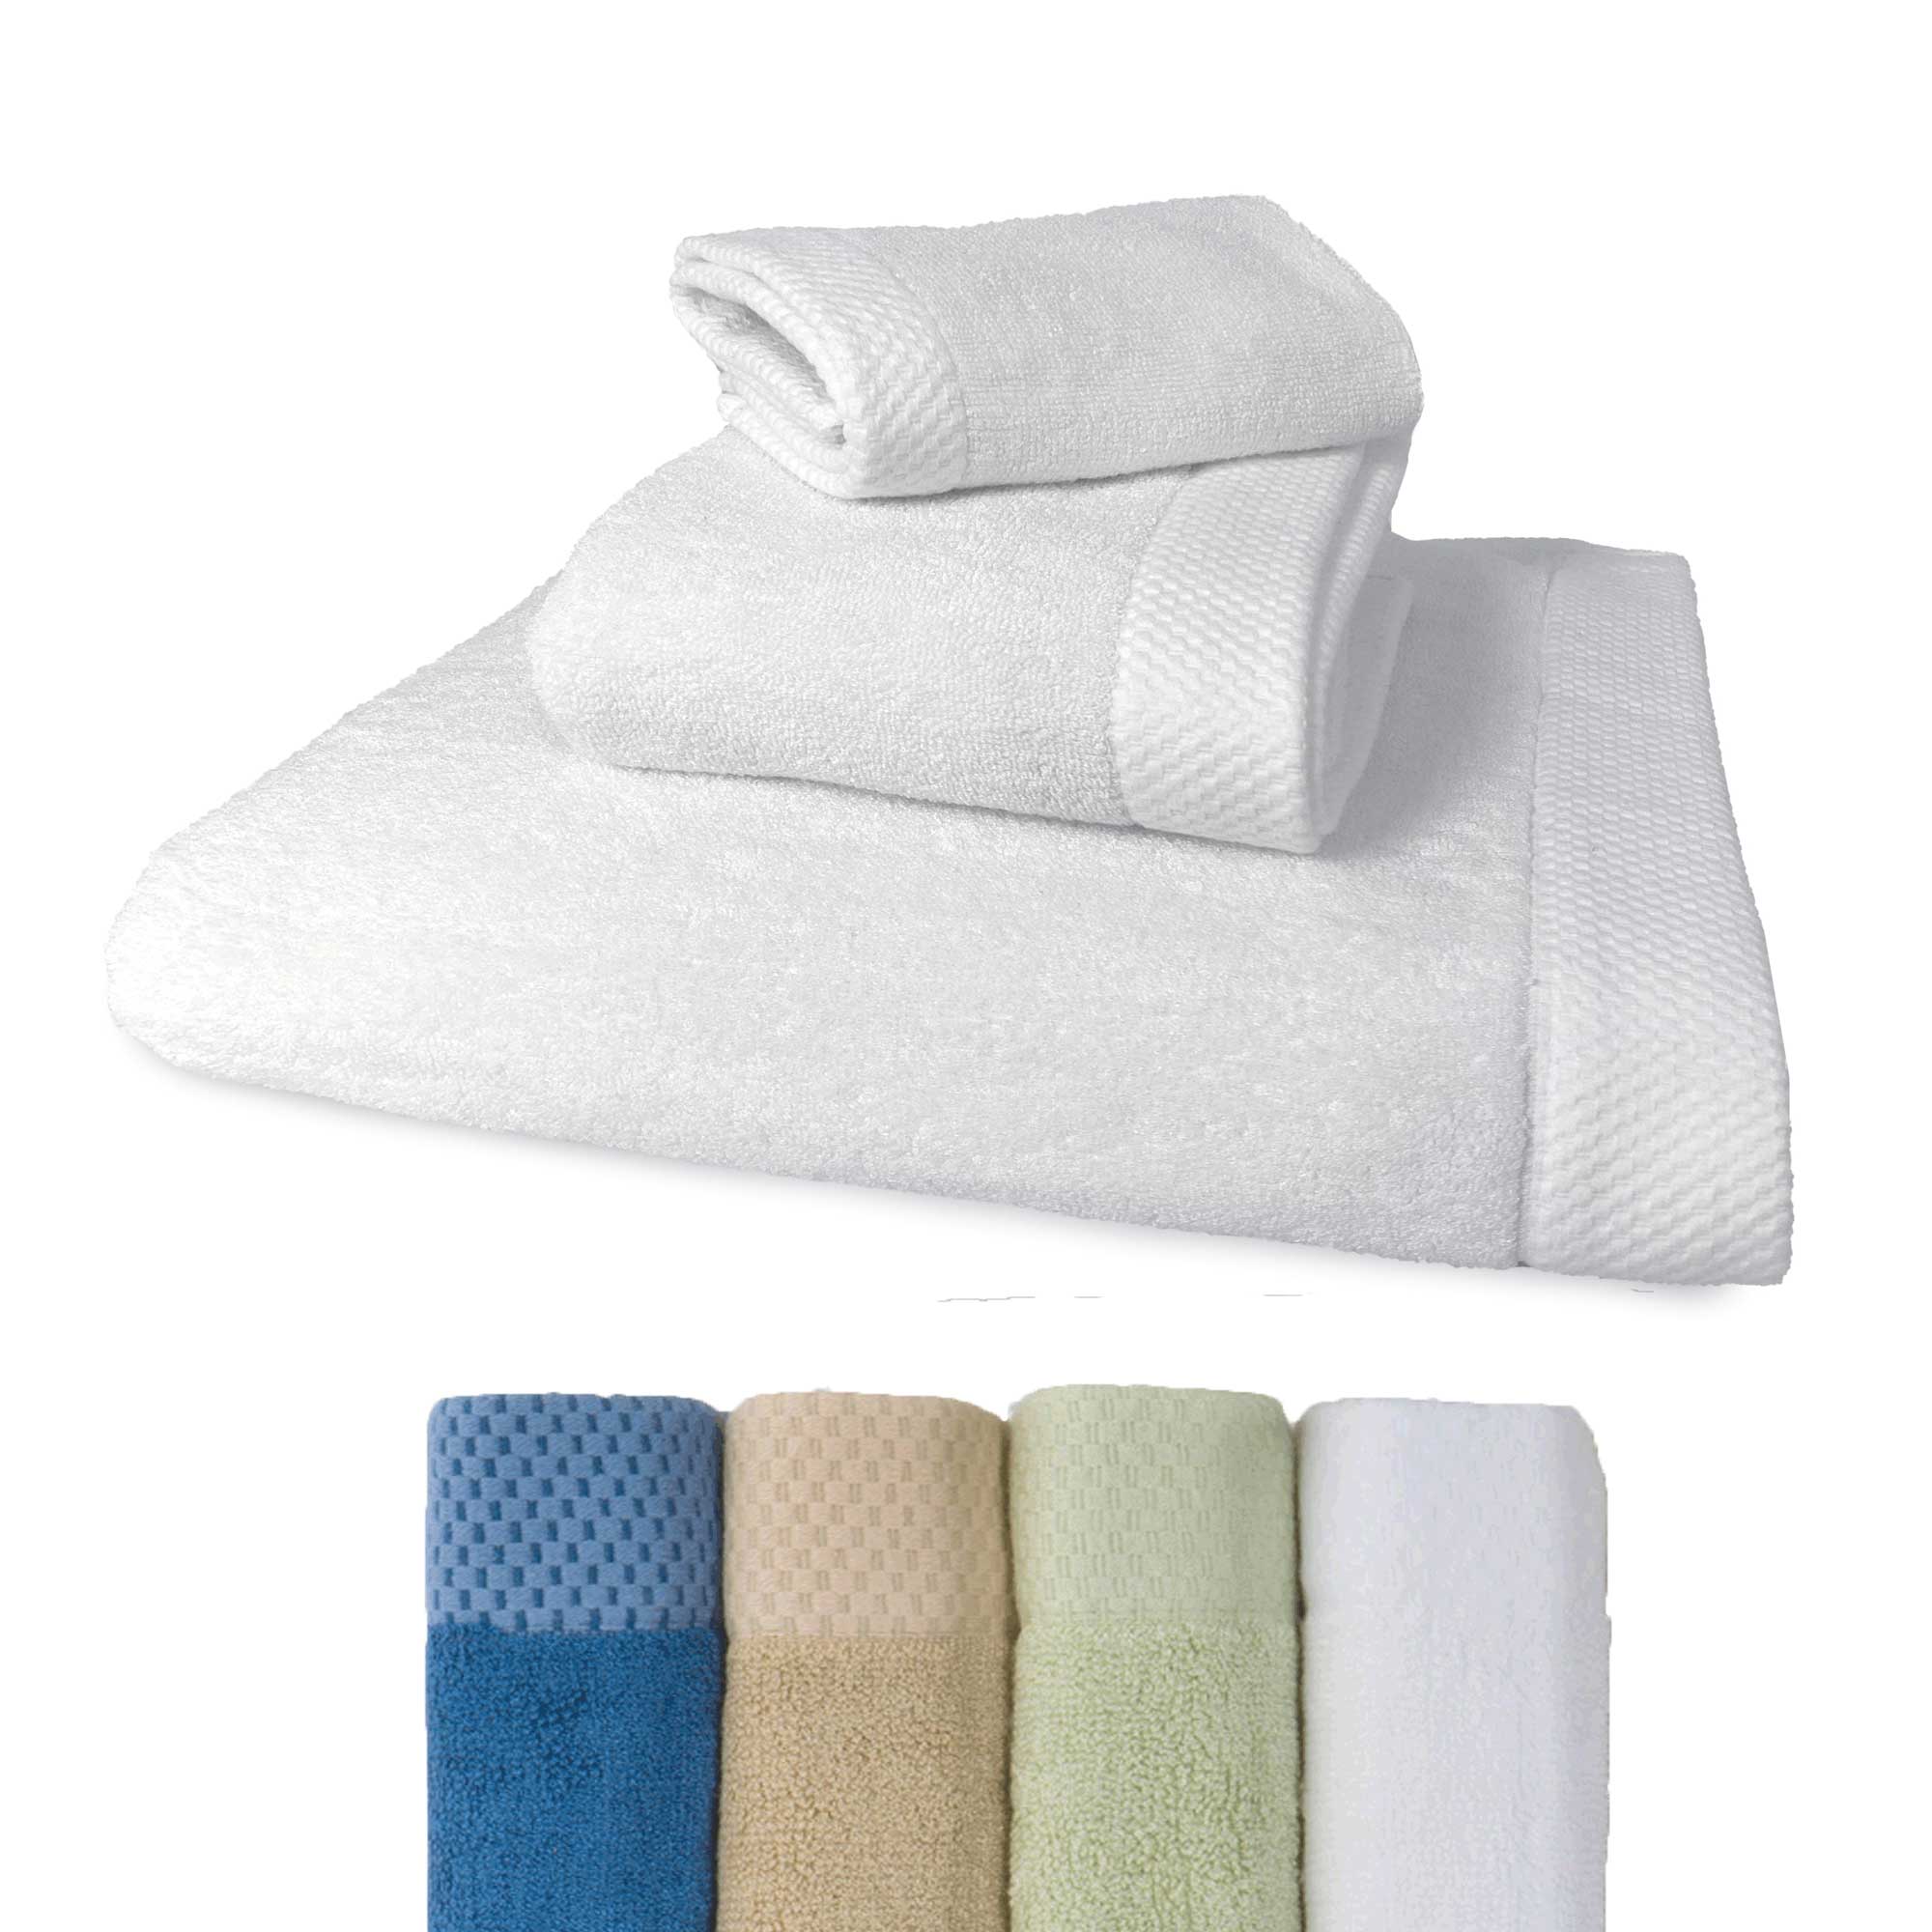 Luxury BAMBOO Towel Set 3Pcs - Soft, Hypoallergenic, Extra Gentle on Sensitive Skin and Hair - Clean & Fresh Longer than 100% Cotton - White